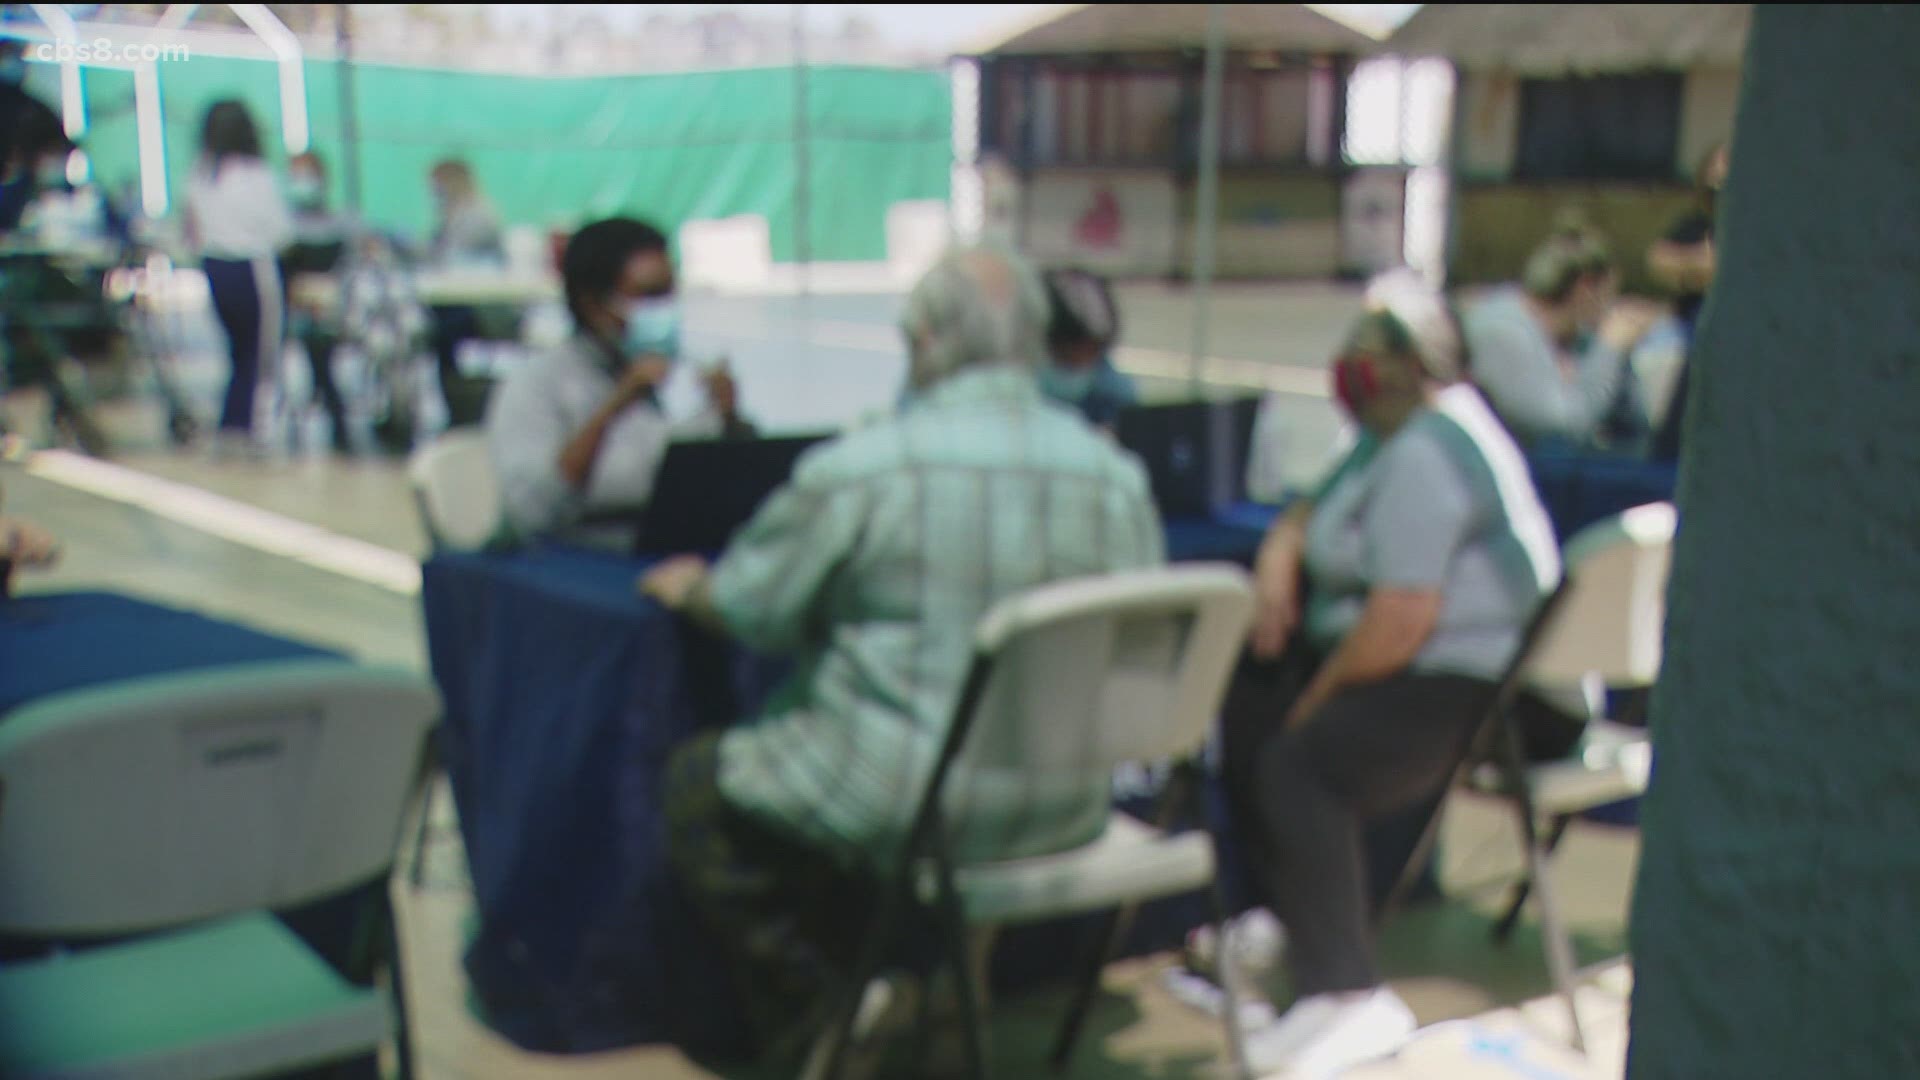 Appointments were not needed at the free vaccine event on Saturday in Lincoln Park.